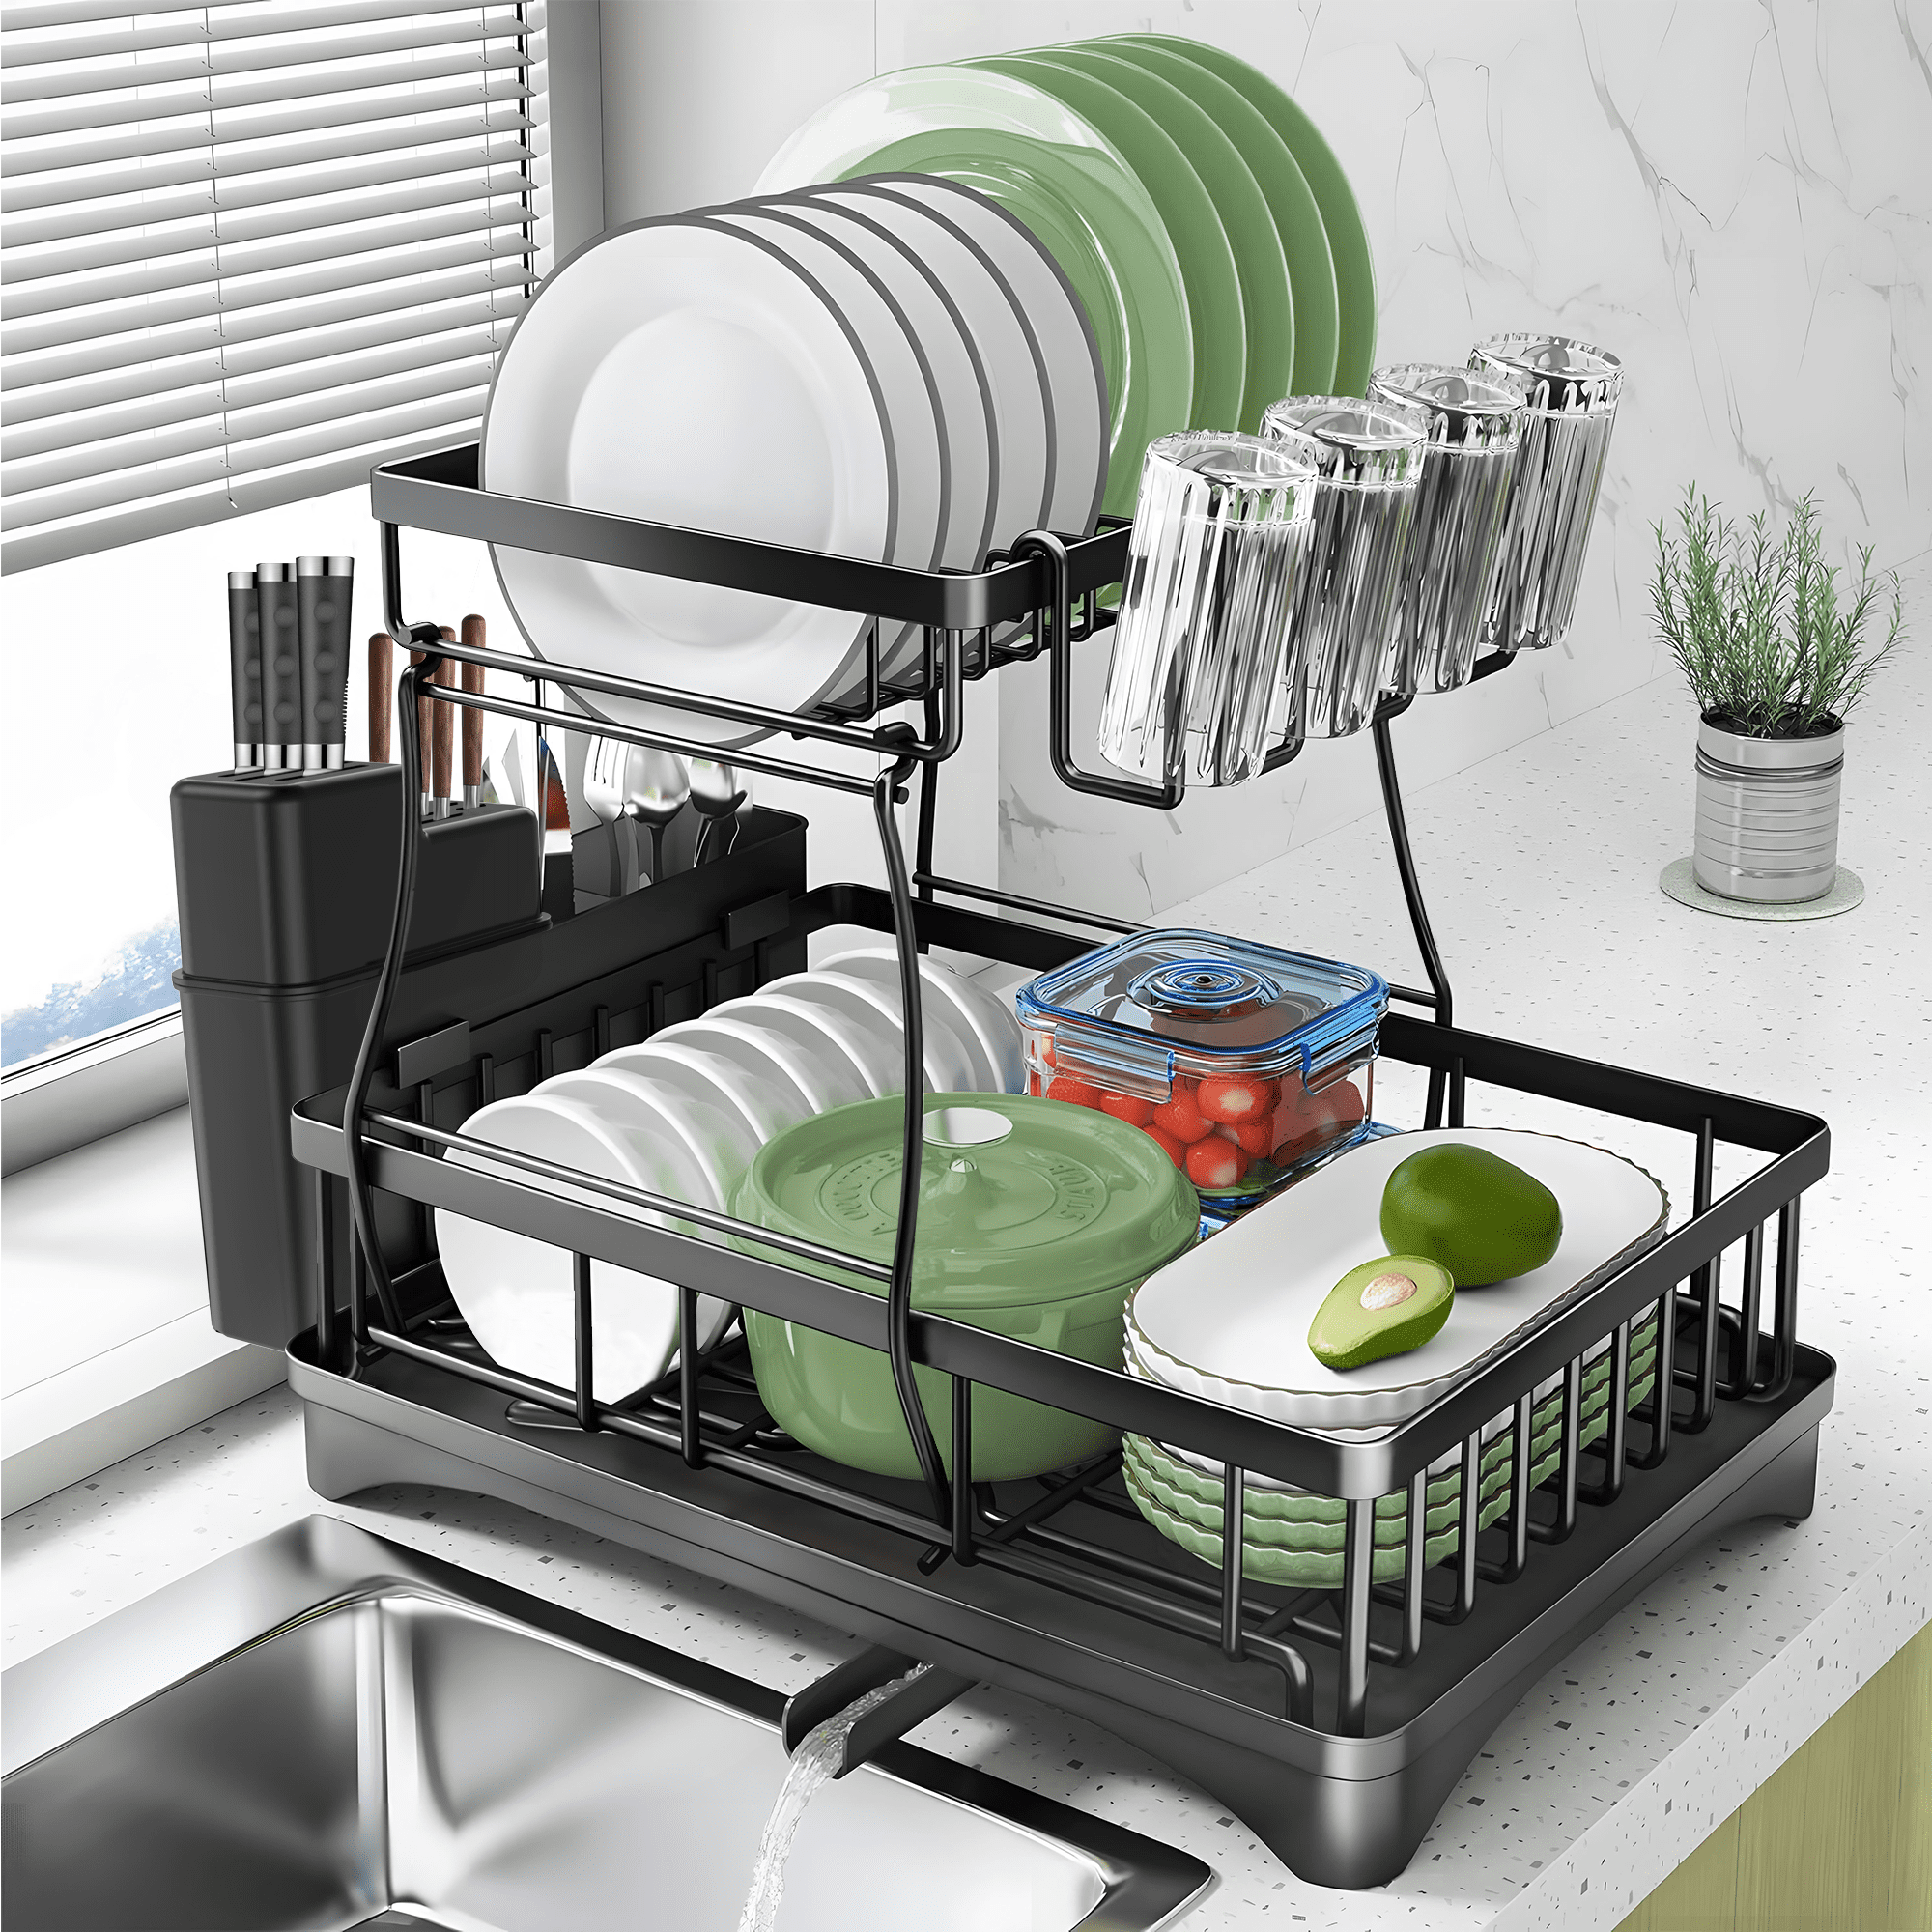 Riousery 2 Tier Dish Racks for Kitchen Counter, Dish Drying Rack with Dish  Drainer, Stainless Steel Dish Rack Drain Set with Utensil Cups Holders,  Drain Board with Drainage, Kitchen Organizers 